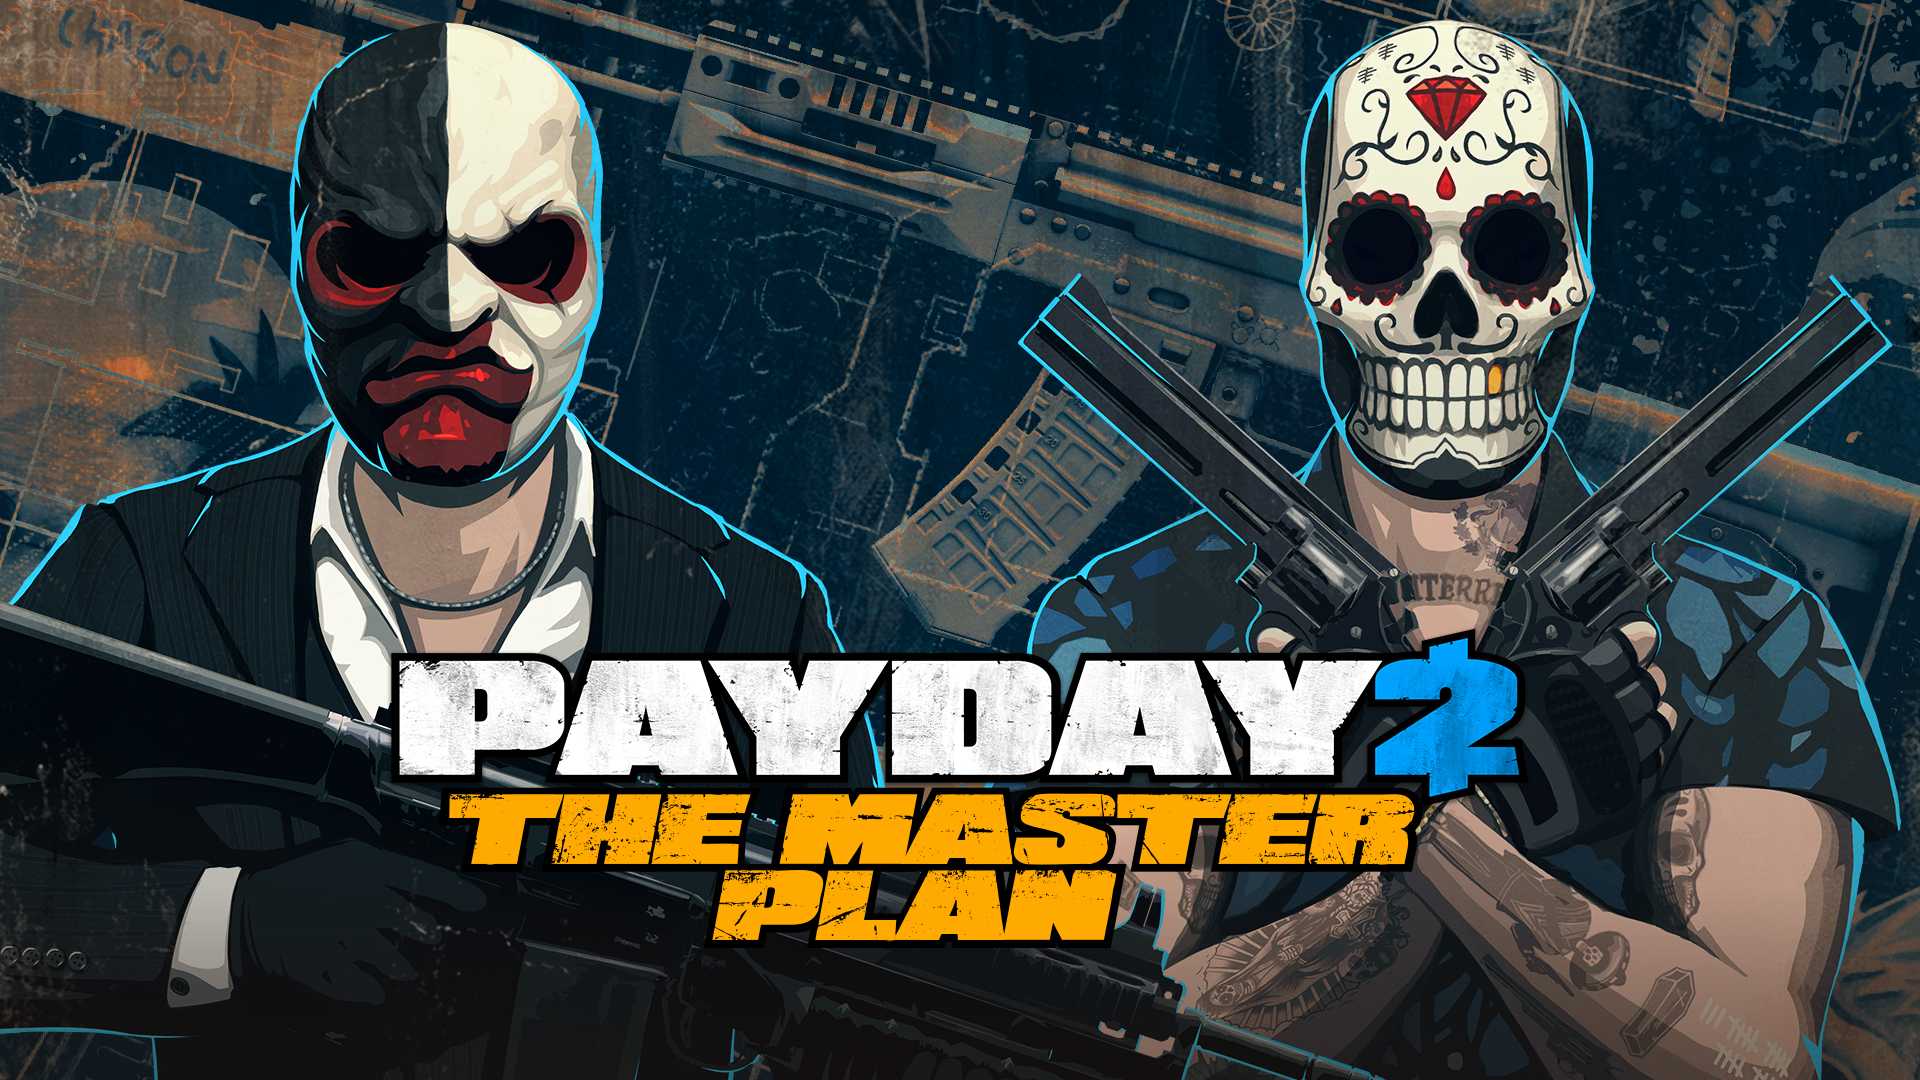 Game one payday 2 фото 55